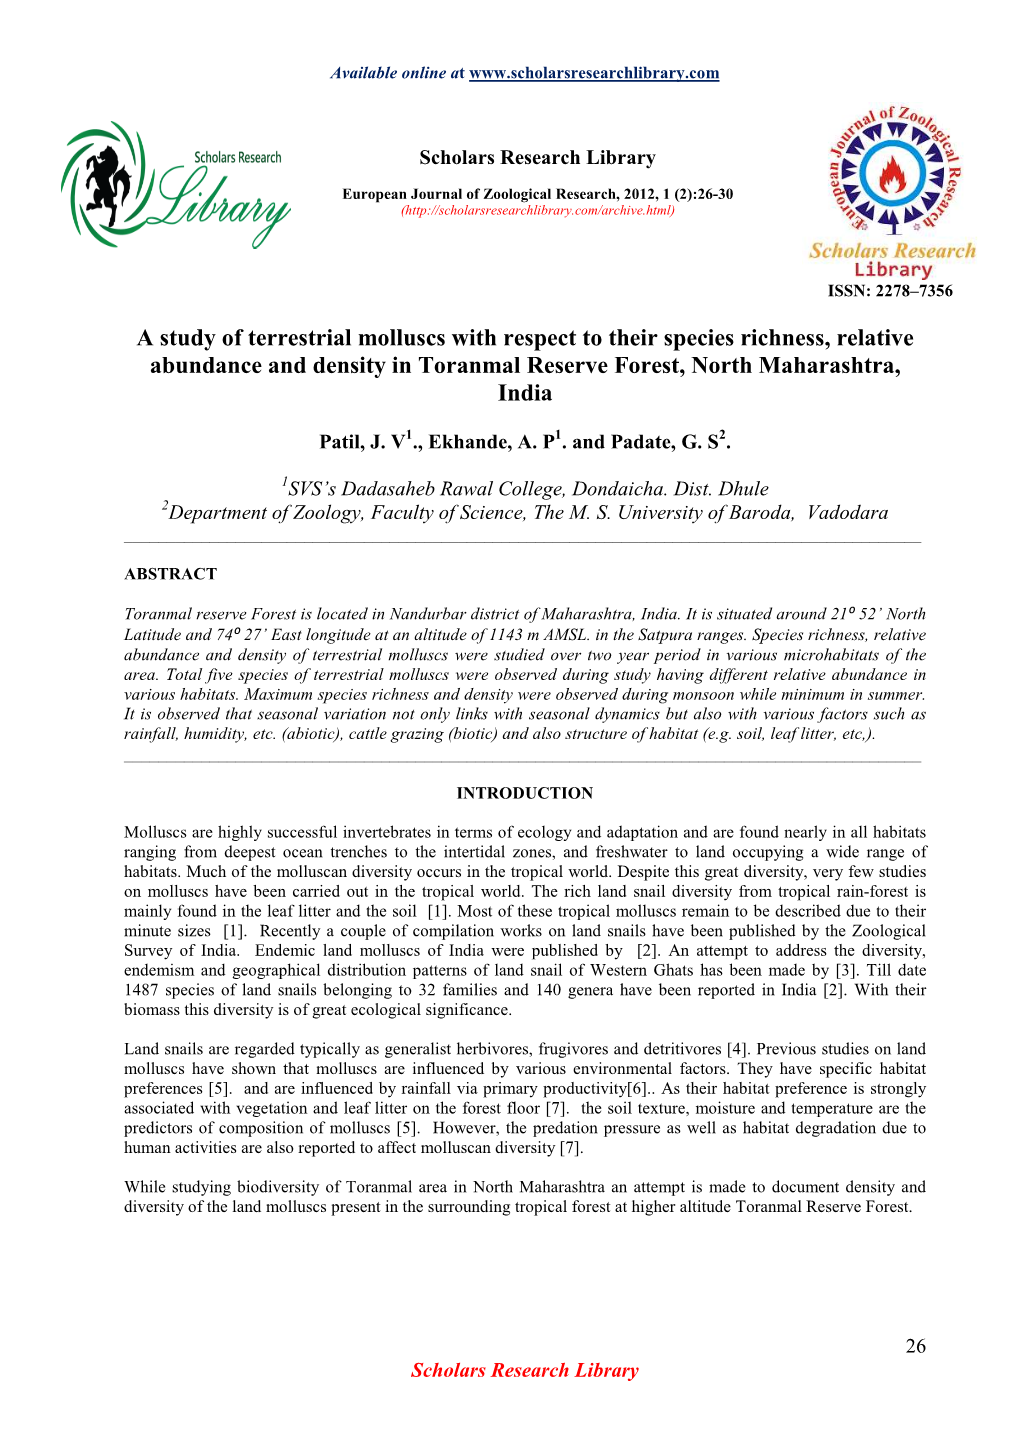 A Study of Terrestrial Molluscs with Respect to Their Species Richness, Relative Abundance and Density in Toranmal Reserve Forest, North Maharashtra, India